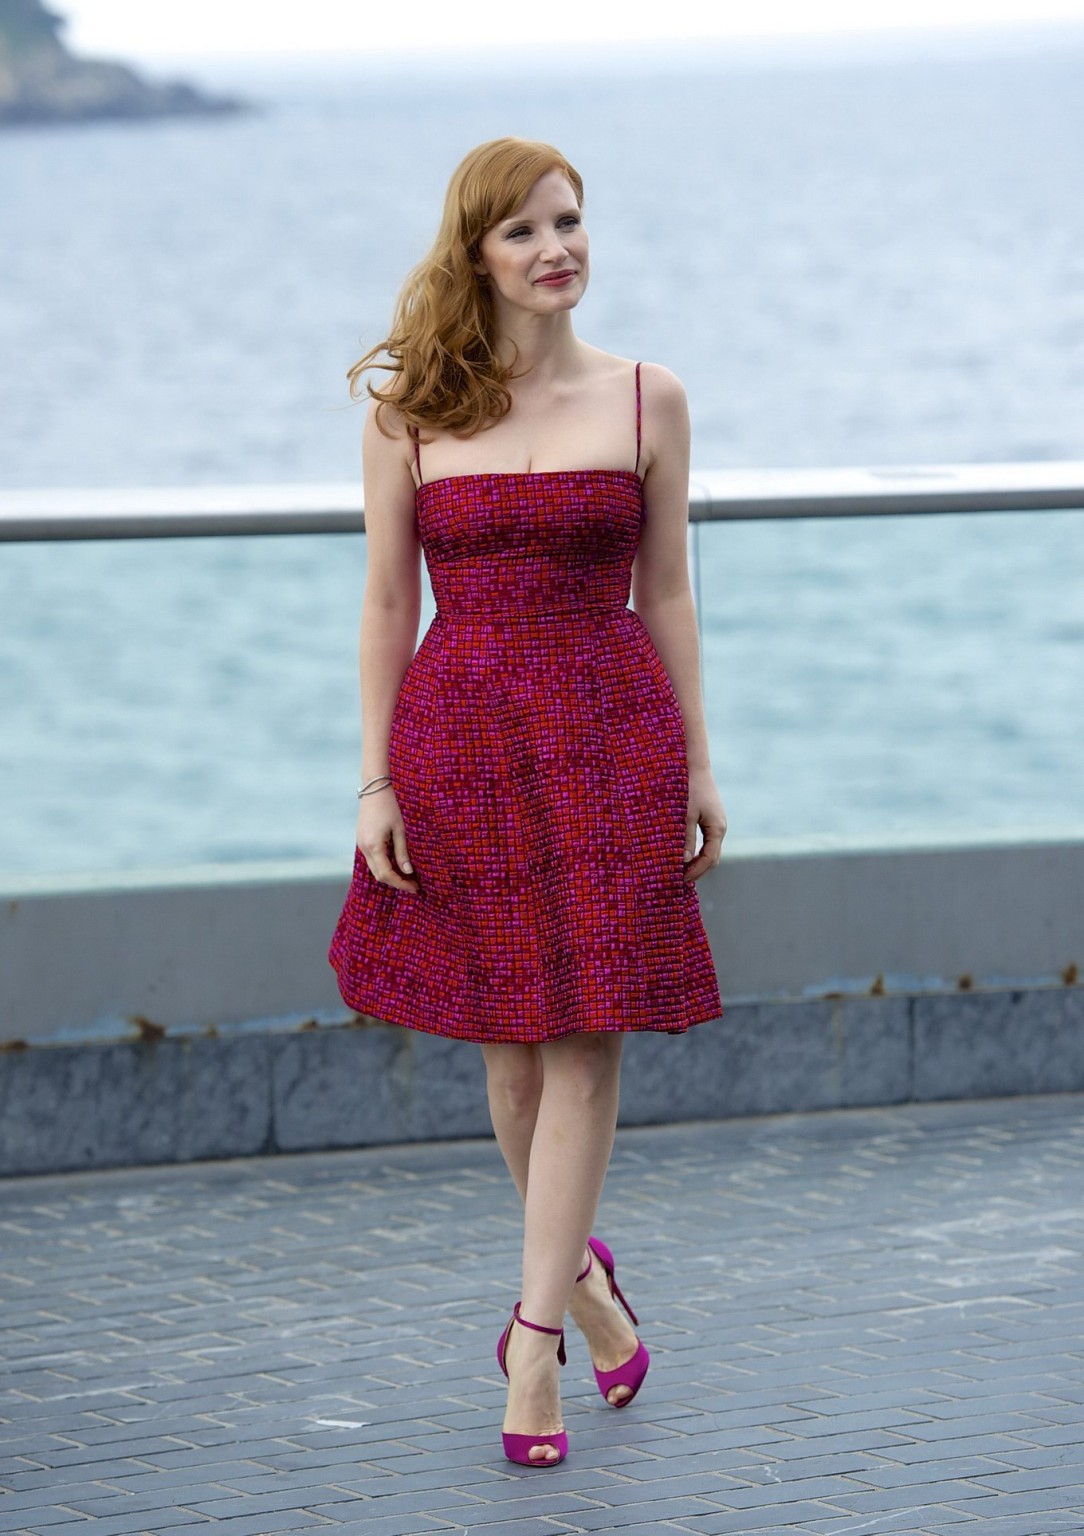 Jessica Chastain showing cleavage at The Dissapearance of Eleanor Rigby photocal #75184895